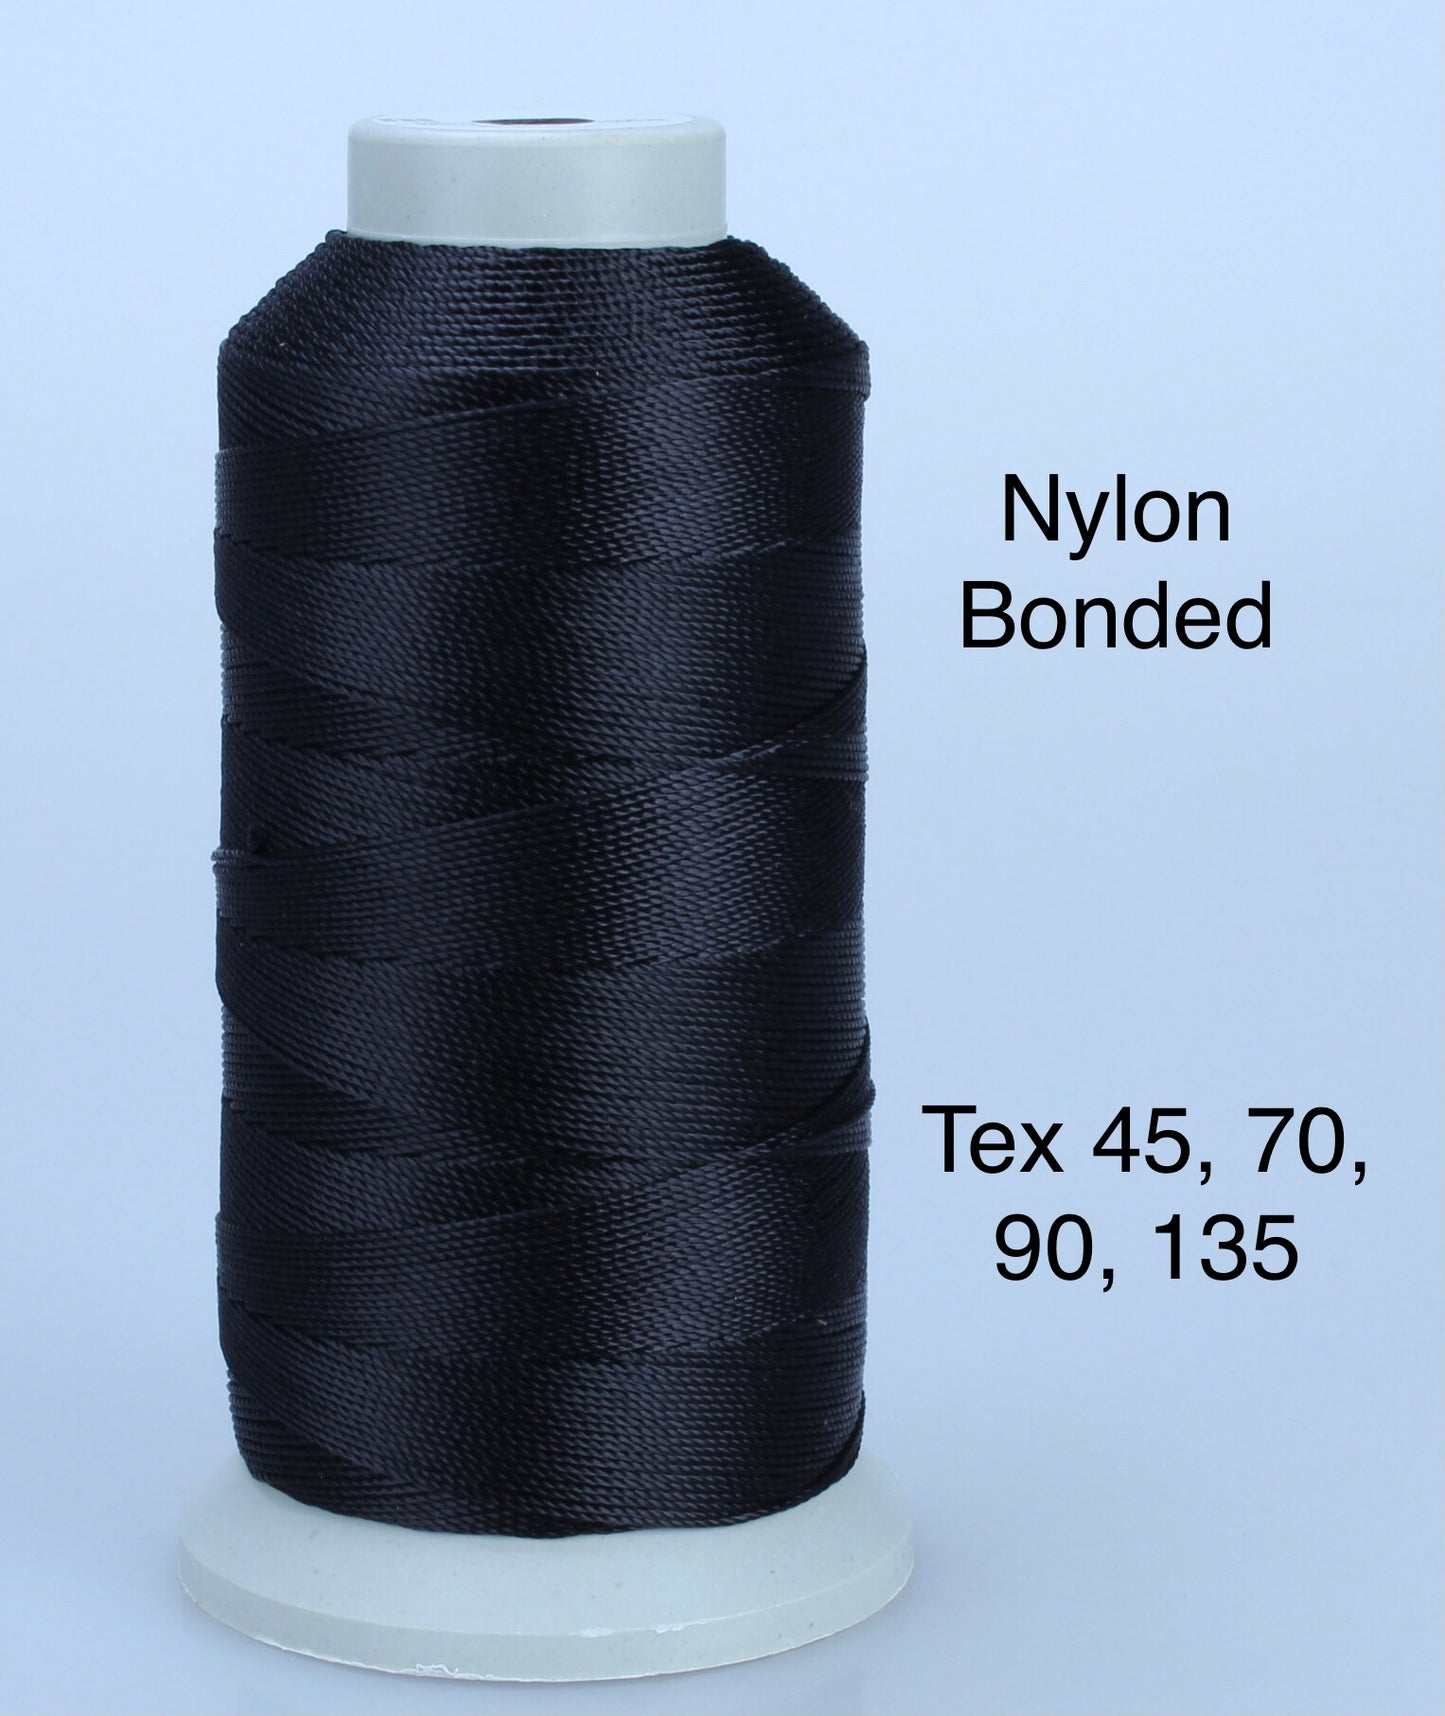 Black bonded nylon thread, Tex 45, 70, 90, 135 sewing threads for bag making, shoes making, garments, home decor and car interior